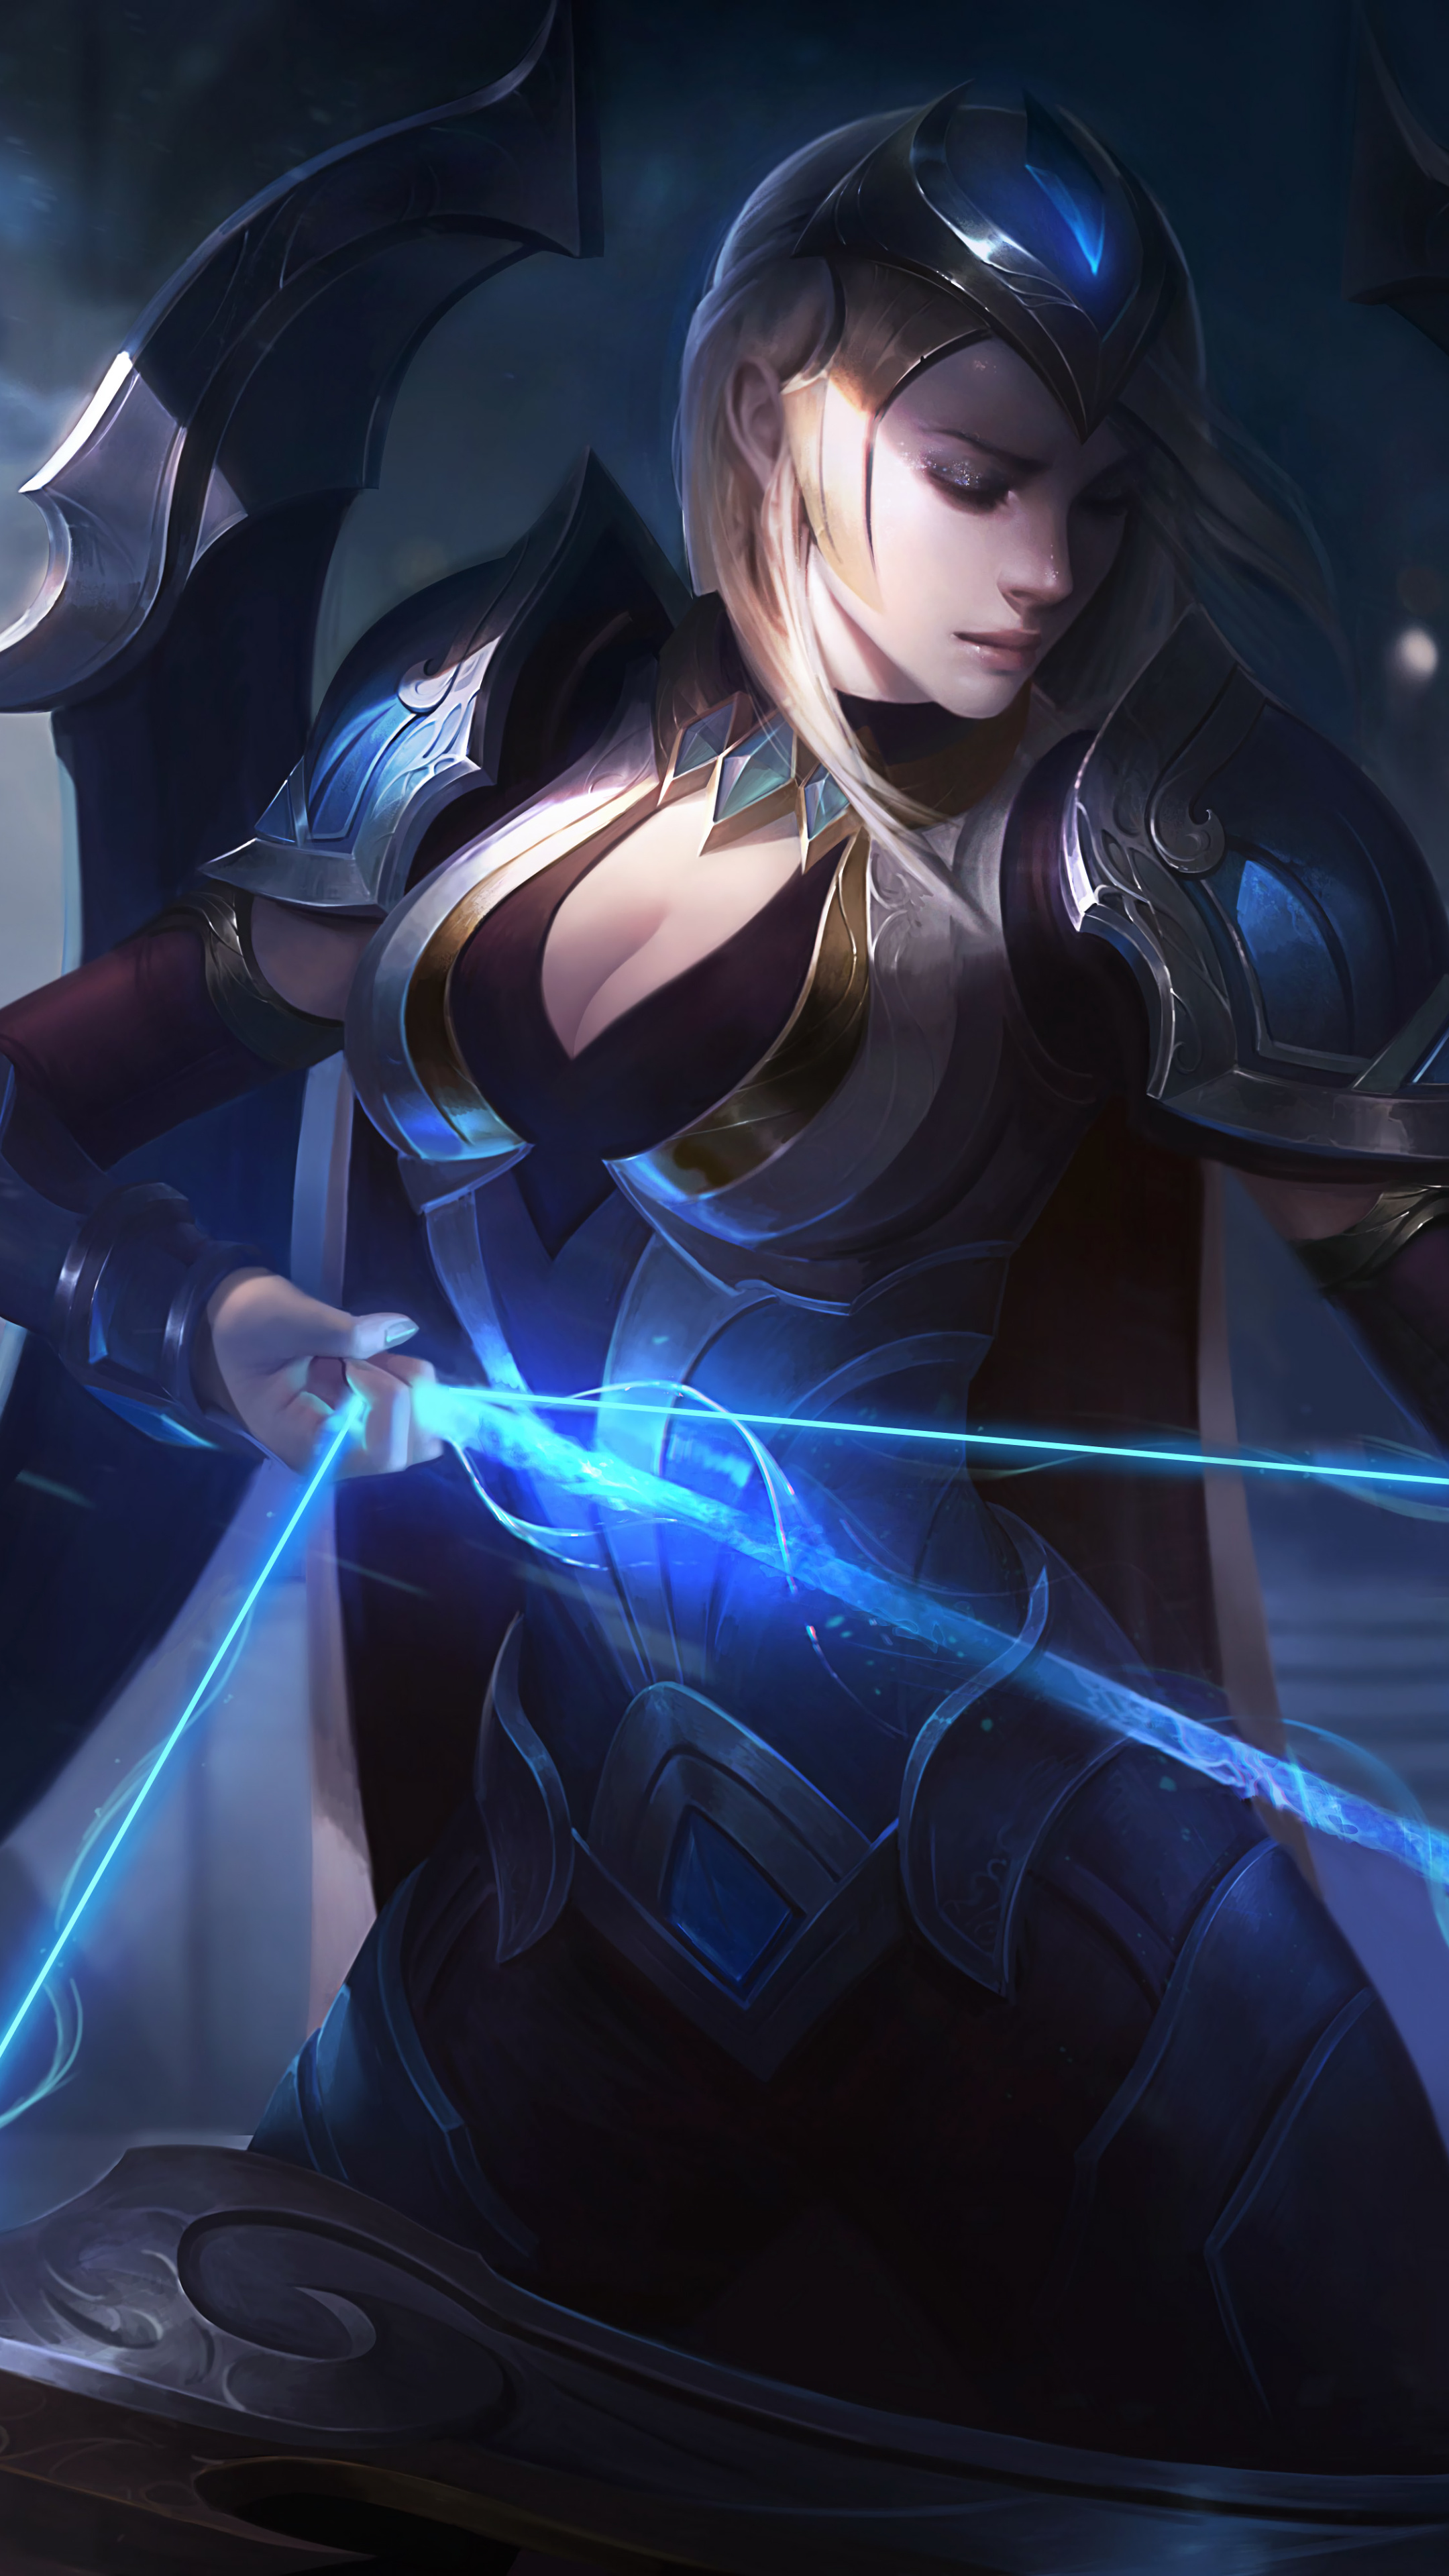 Video game, League of Legends, Gaming, Online multiplayer, 2160x3840 4K Handy